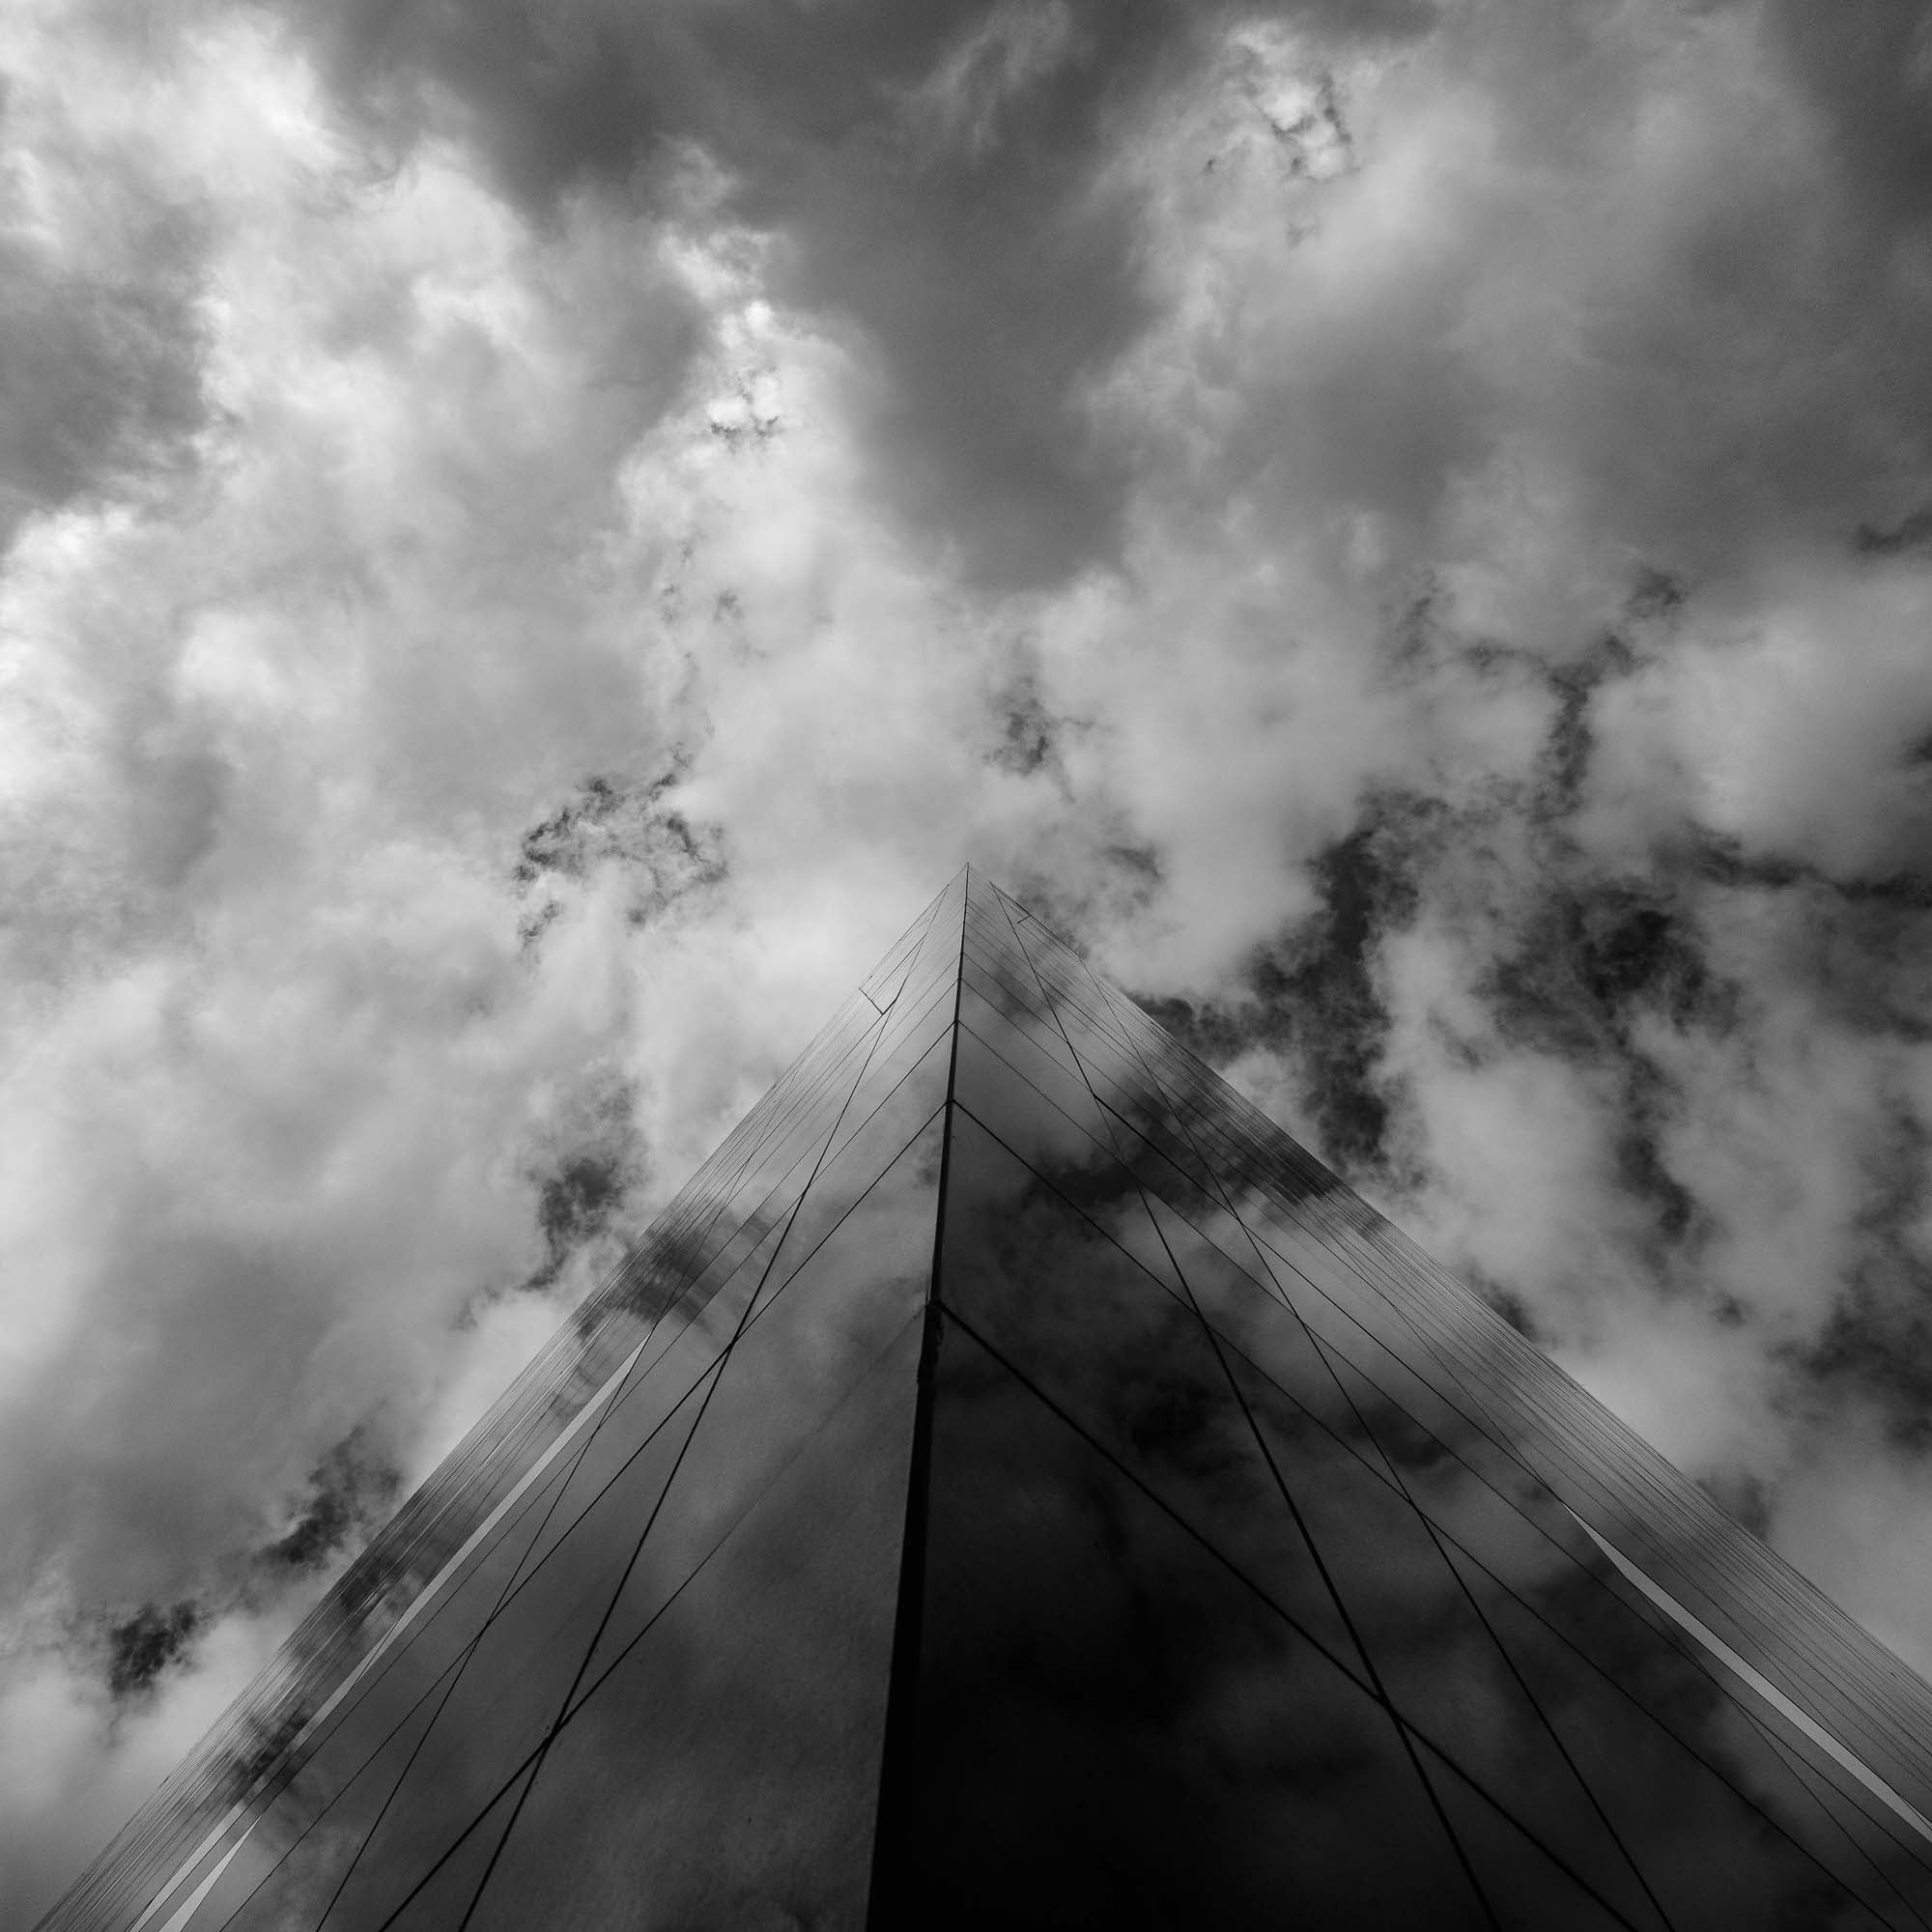 "Black and white photo of the BLOX building in Copenhagen, with its reflective glass facade reaching into a dramatic sky."